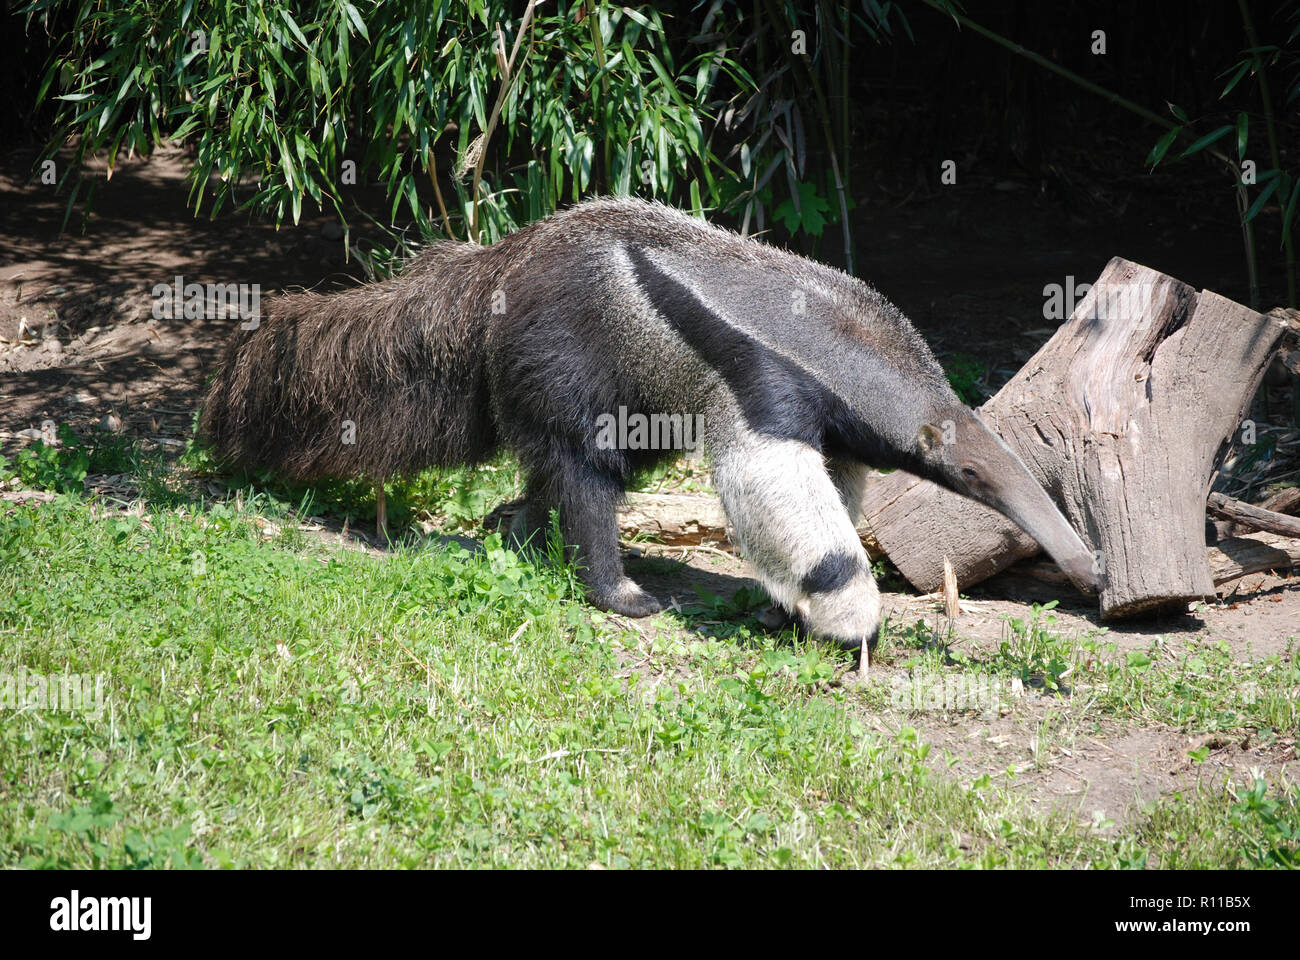 Anteater with a long nose and long tail strutting his suff. Stock Photo